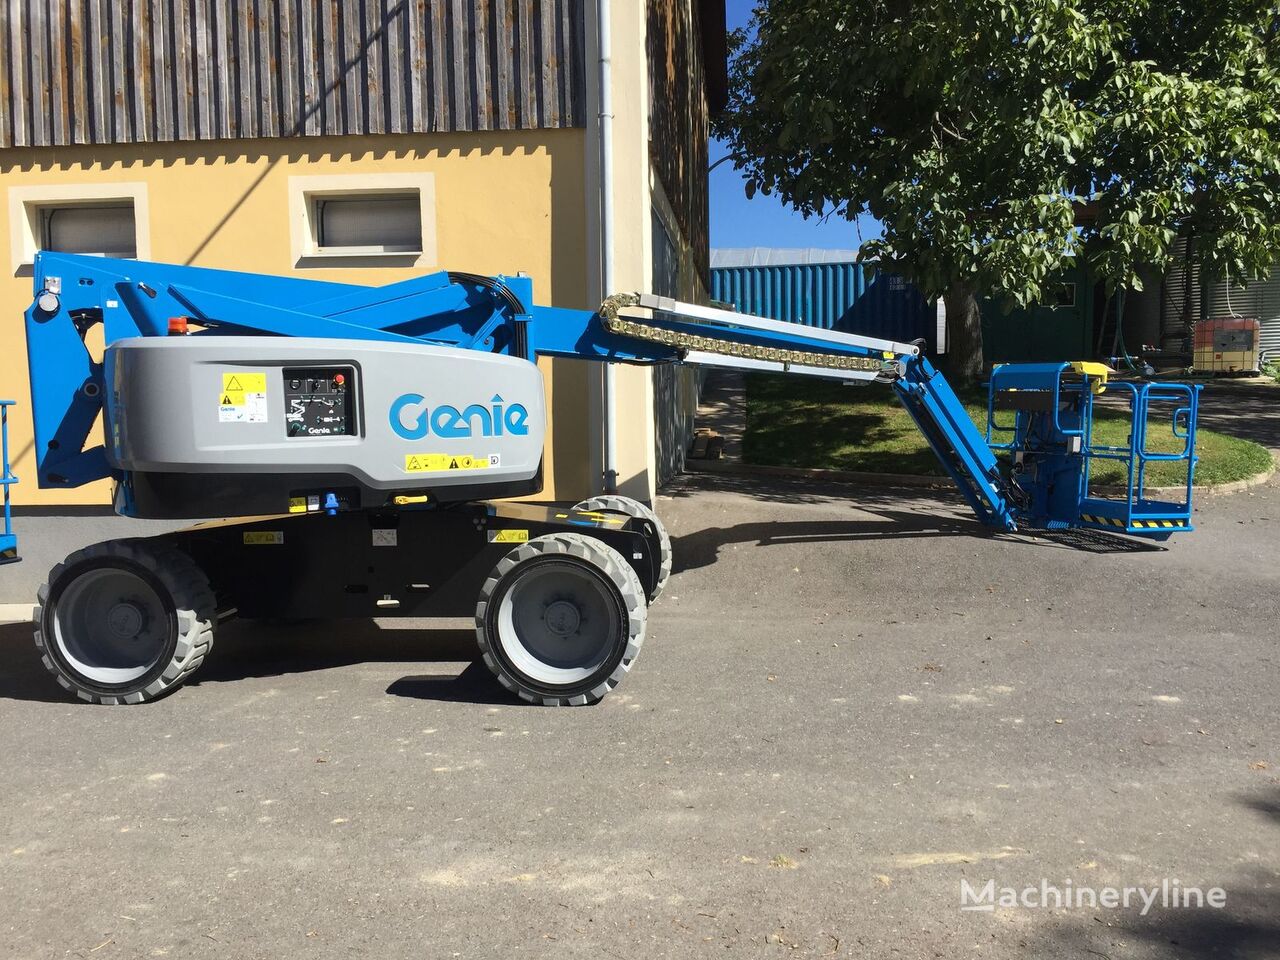 new Genie Z60/FE articulated boom lift